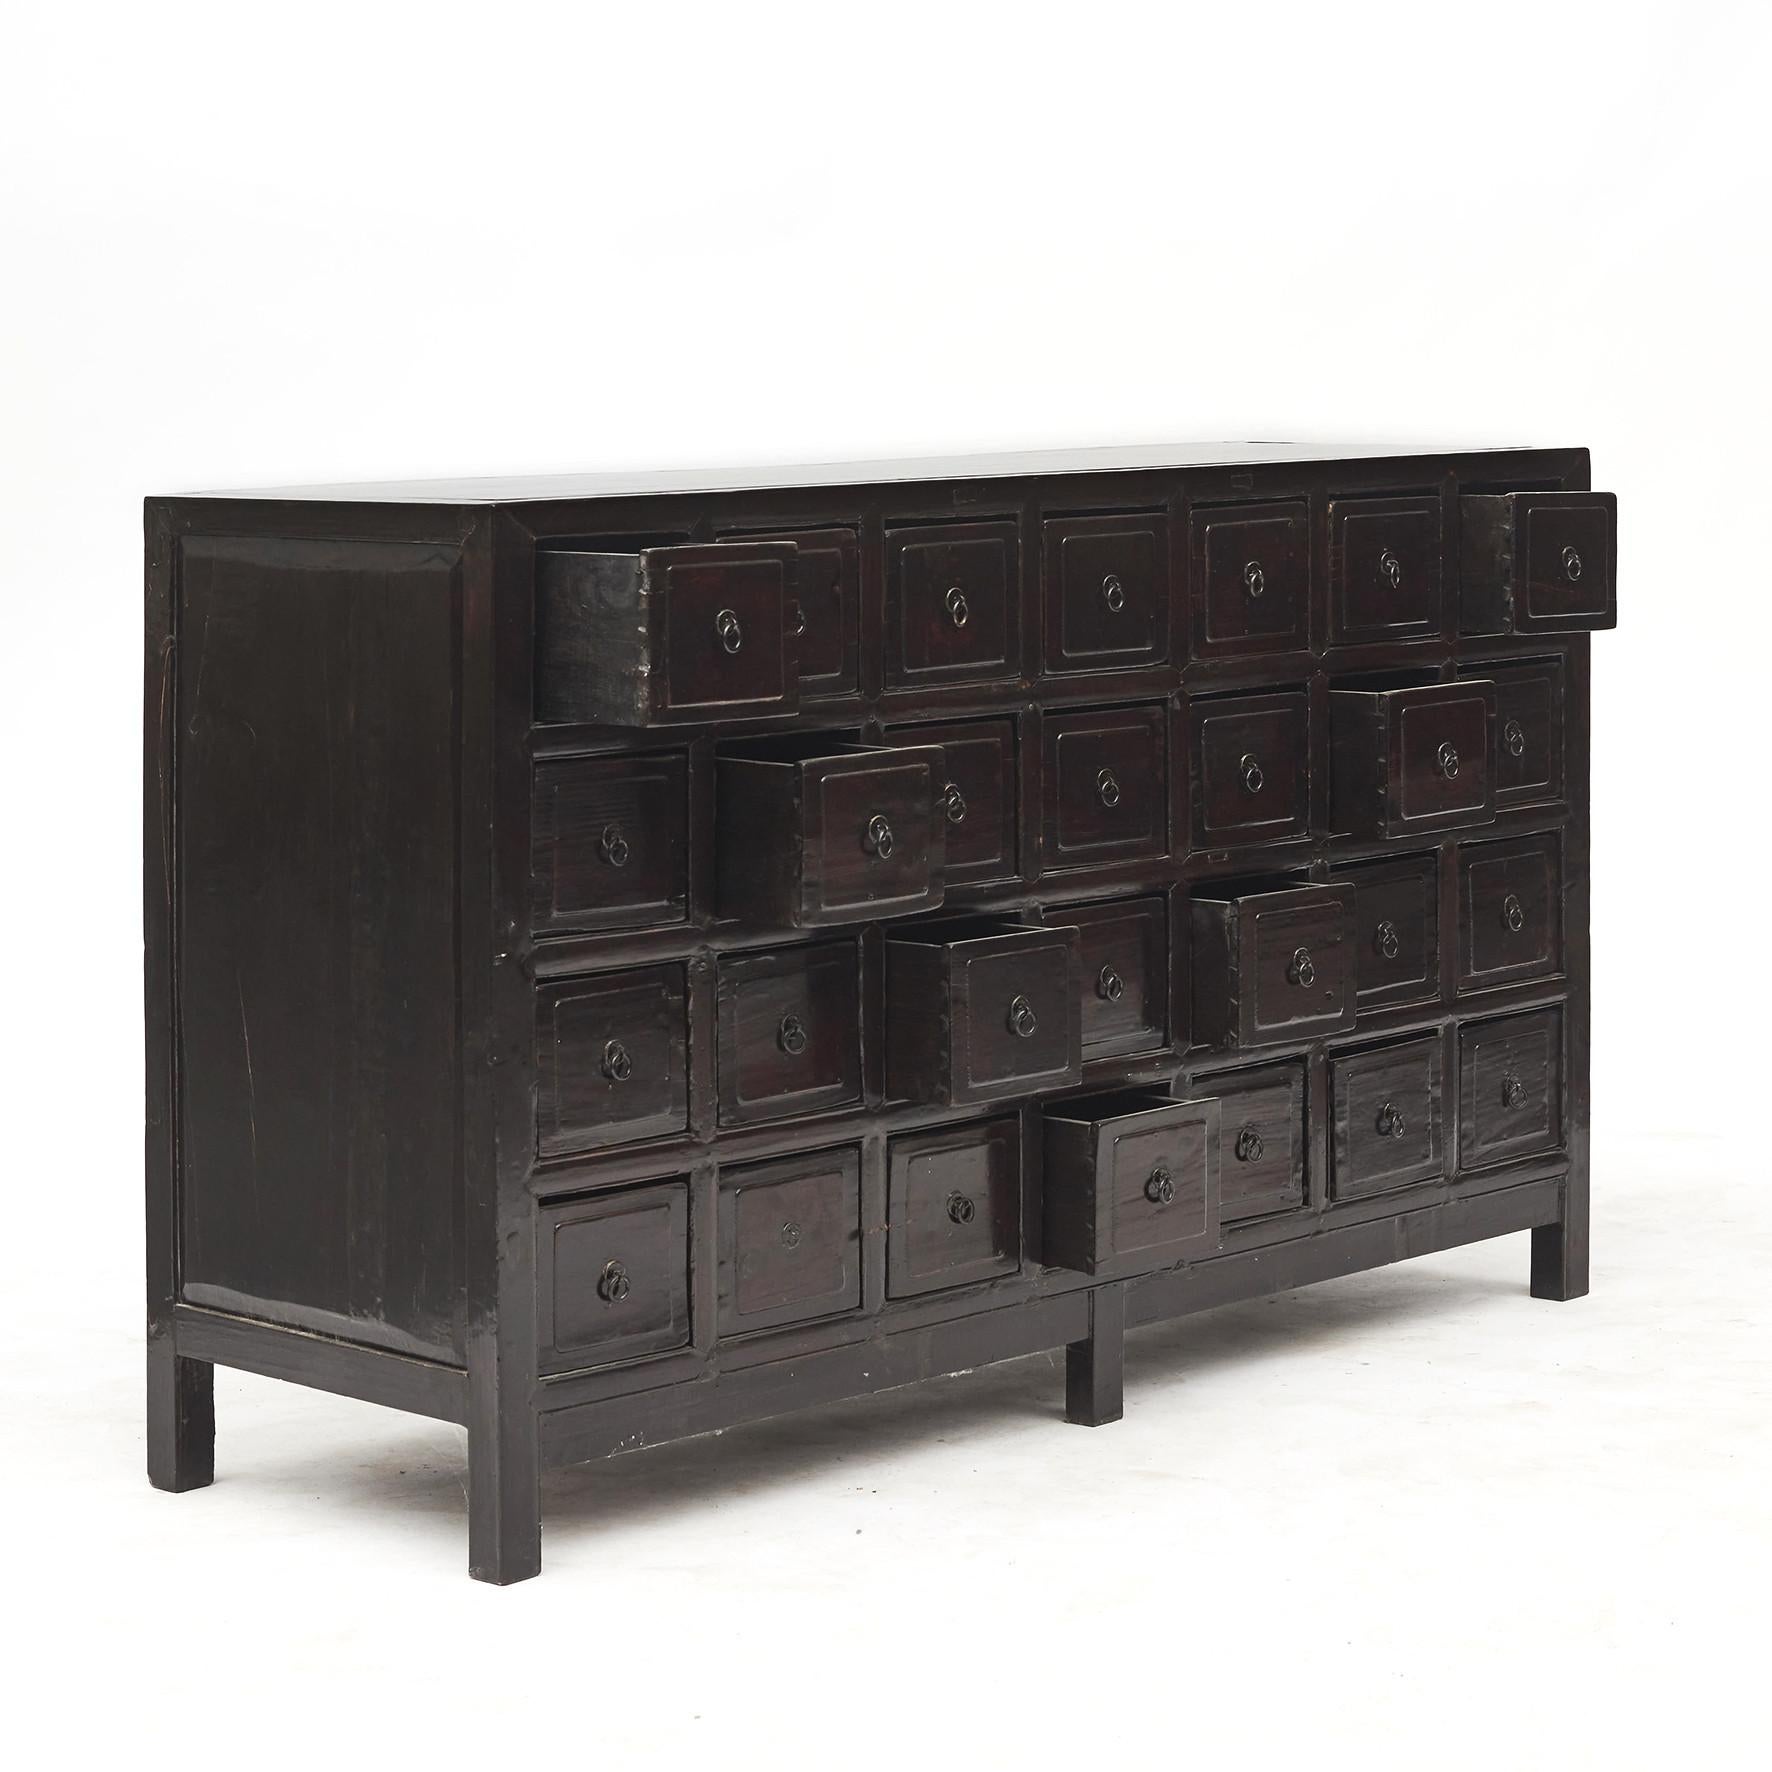 Chinese apothecary / pharmacy medicine chest with 28 drawers in black / burgundy lacquer. From Jiangsu Province, late 19th century.